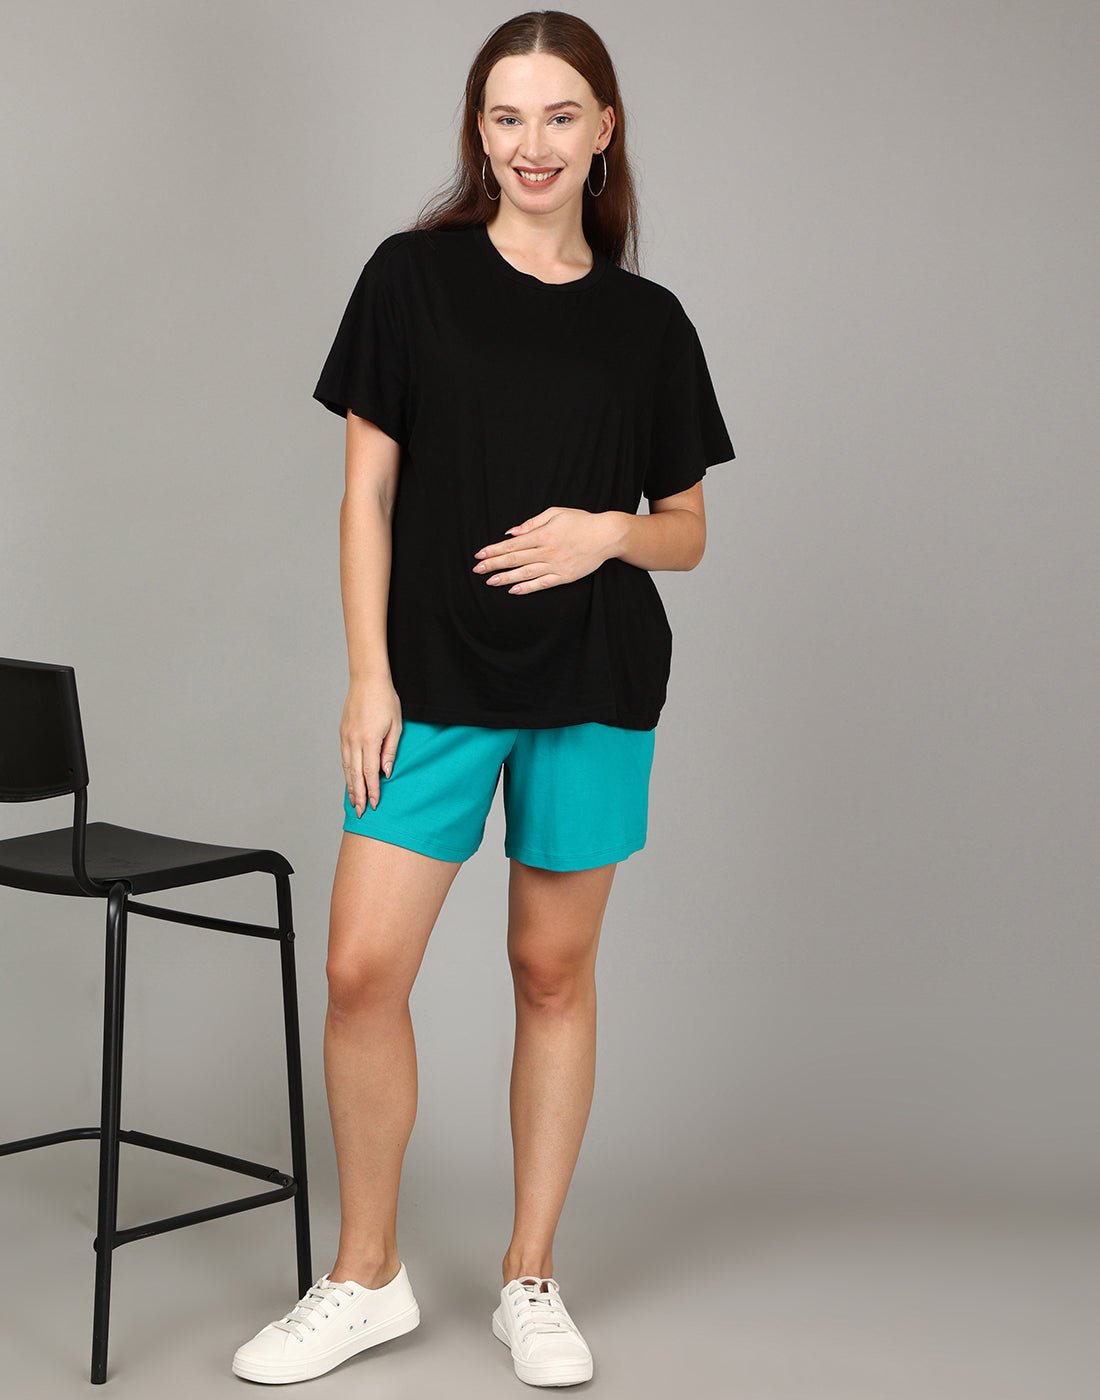 Combo of 2 Comfy Maternity Shorts